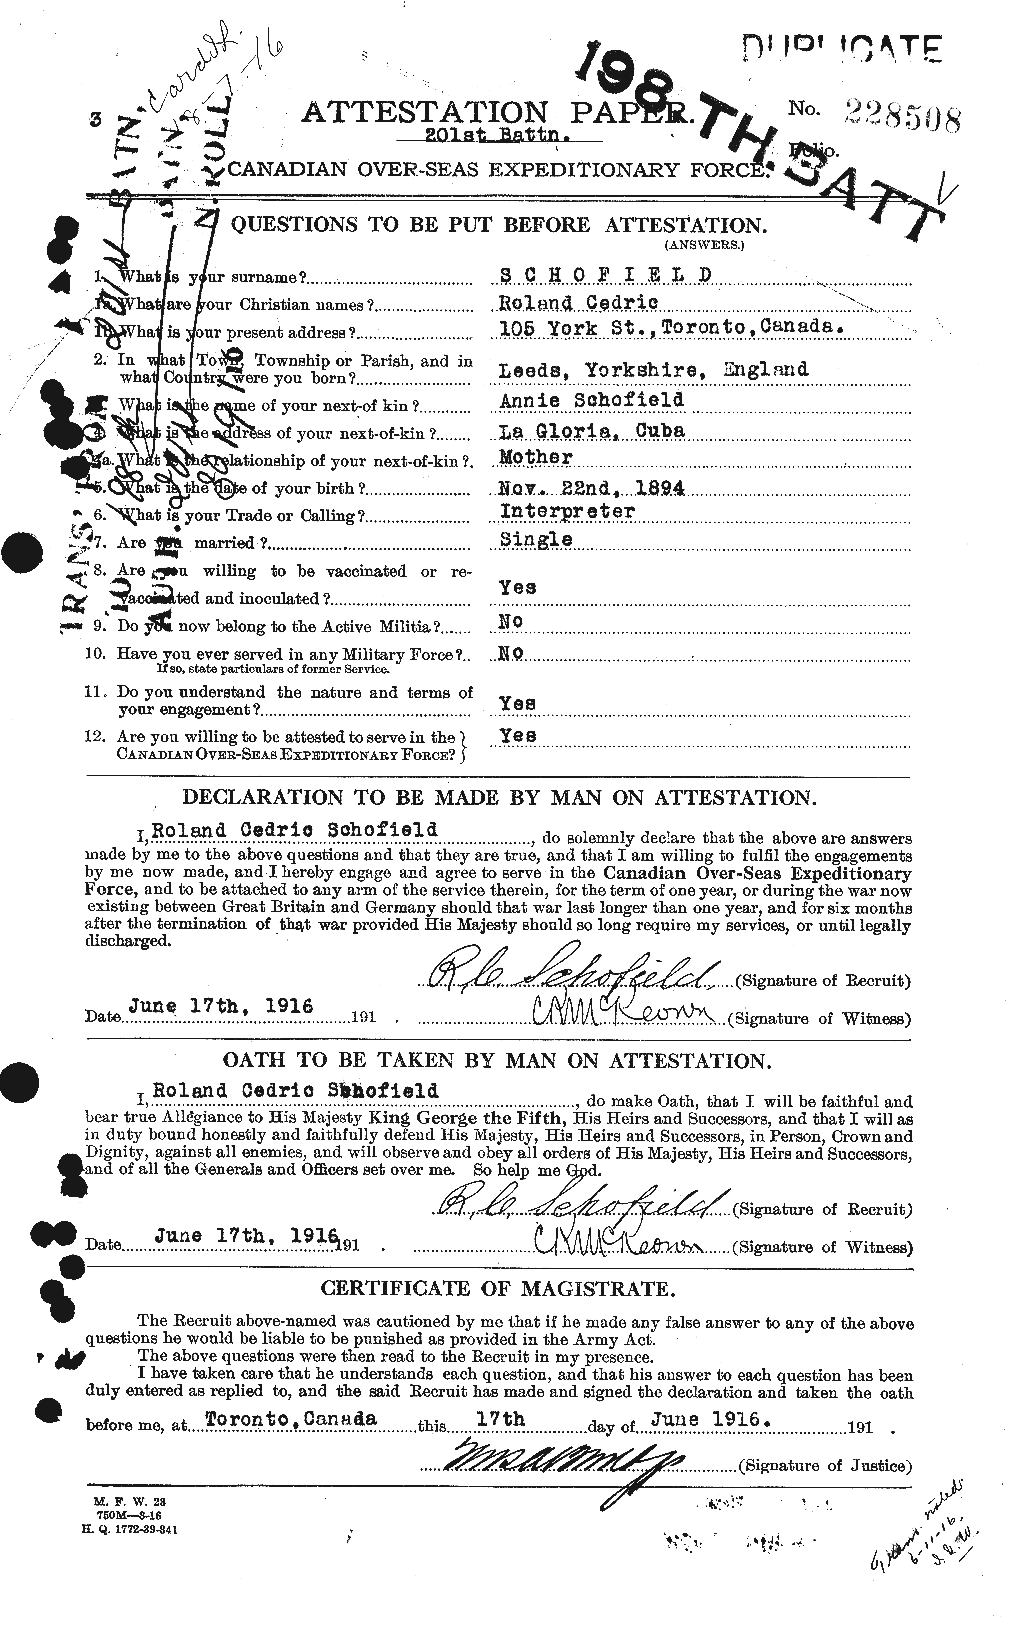 Personnel Records of the First World War - CEF 081059a